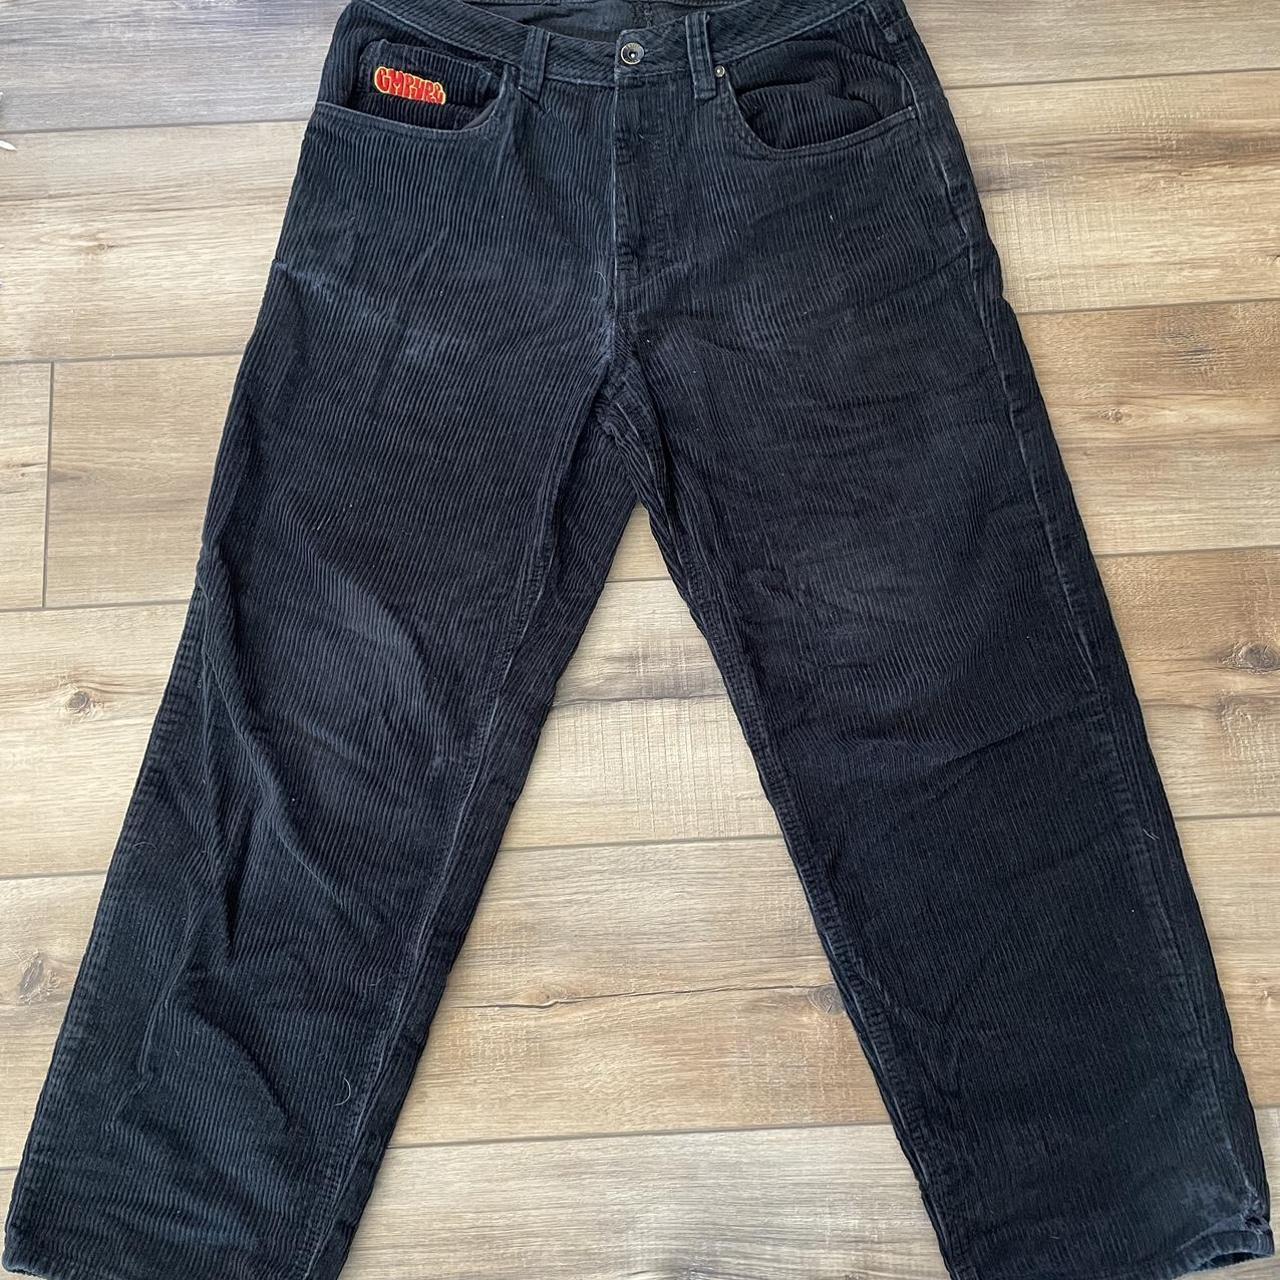 Empyre baggy Black Corduroy Pants 30/30 They have a... - Depop